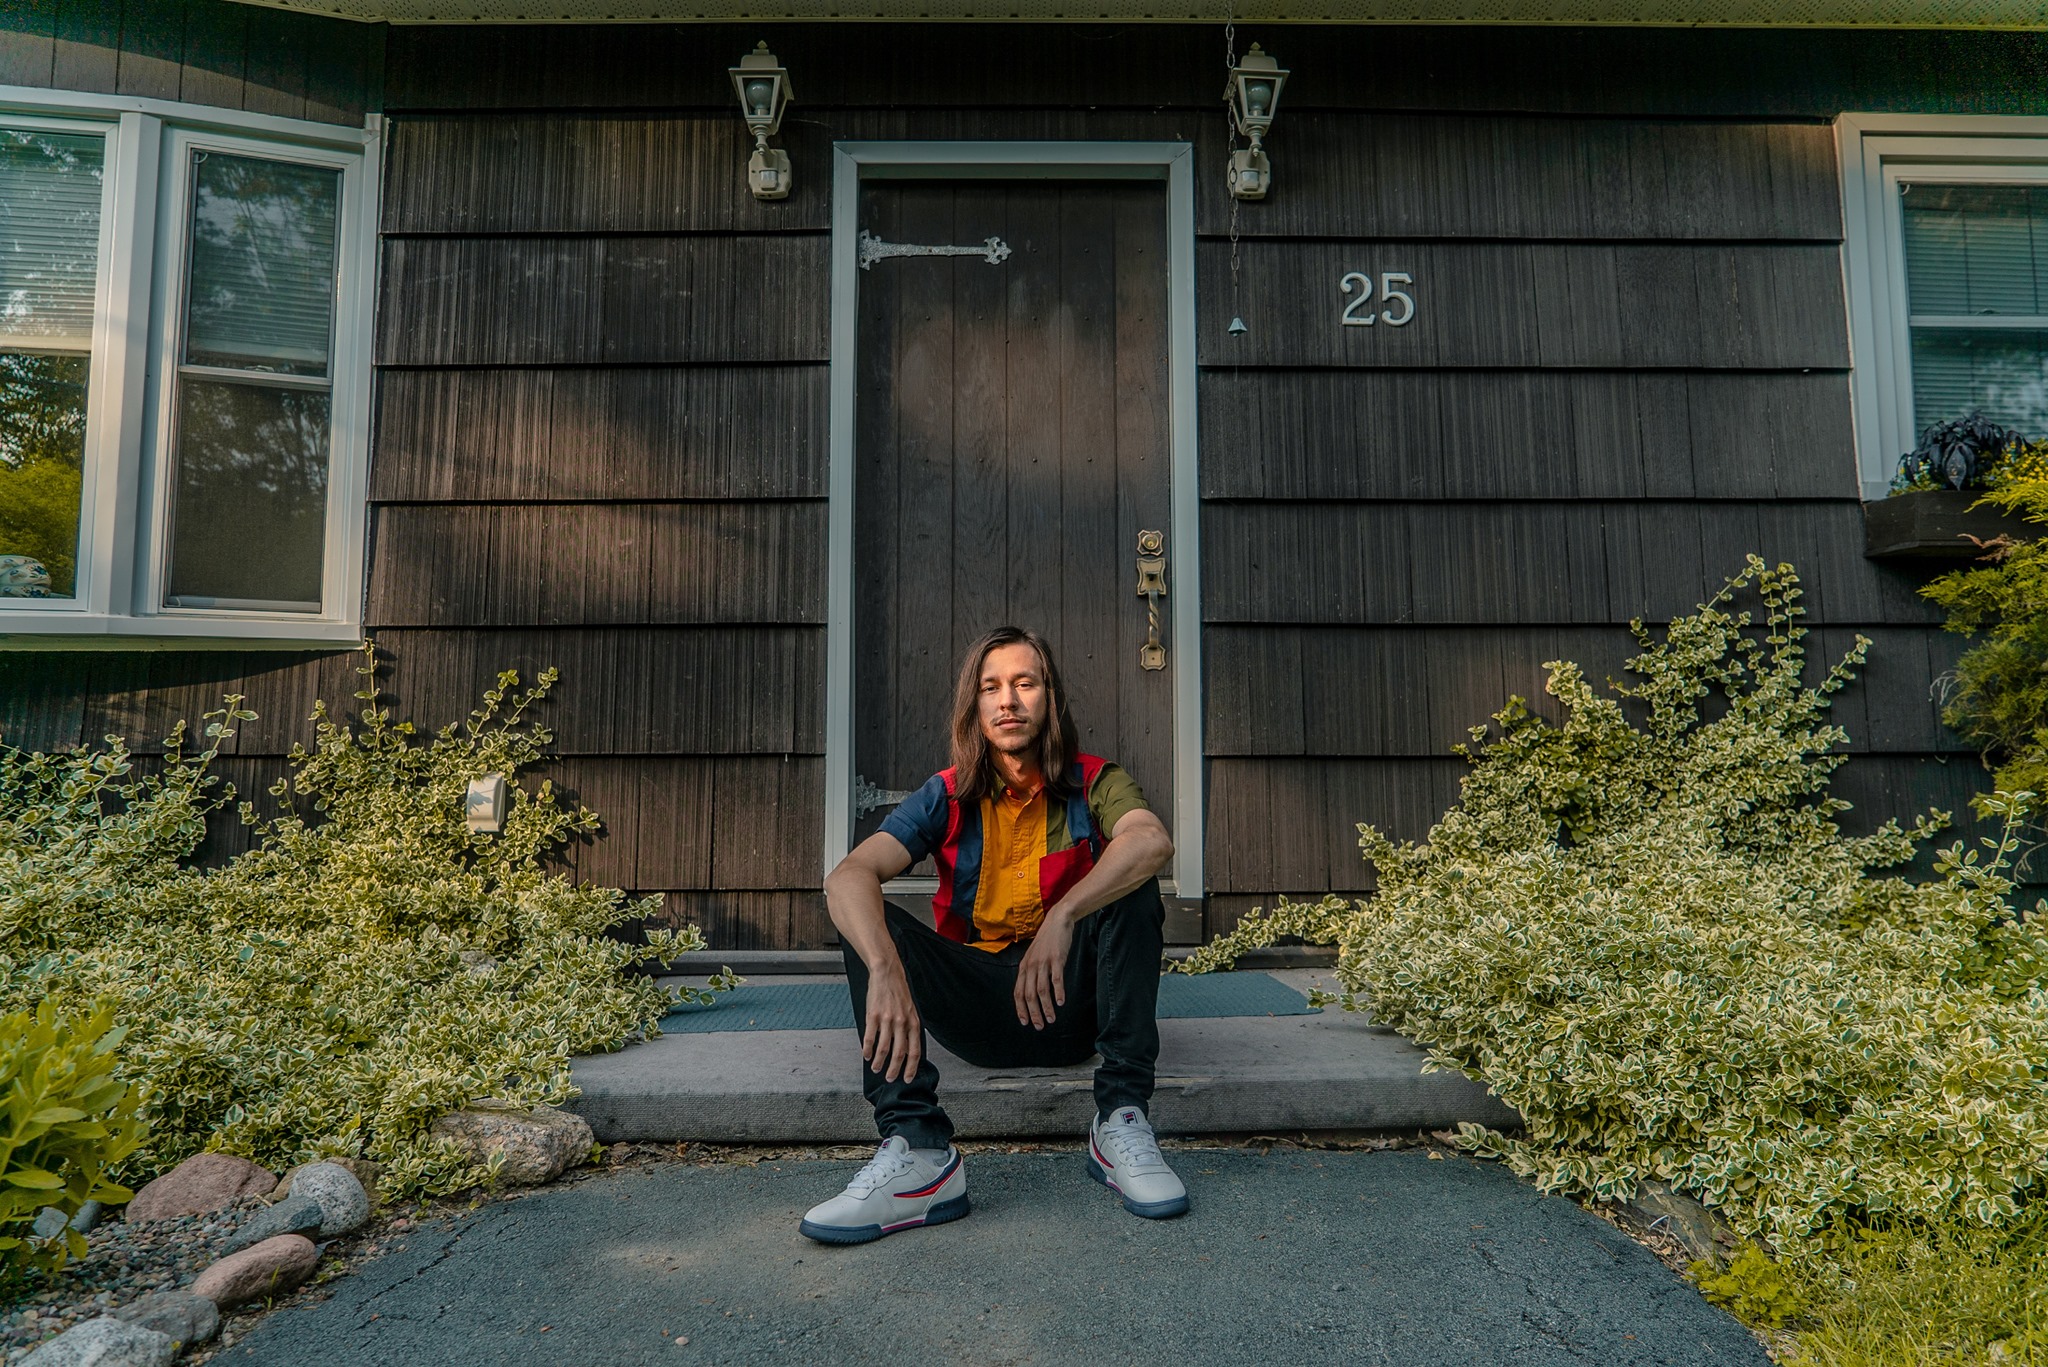 Nova Scotia Singer Sunsetto Unveils Emotional New Single ‘Don’t Leave’ | Music News